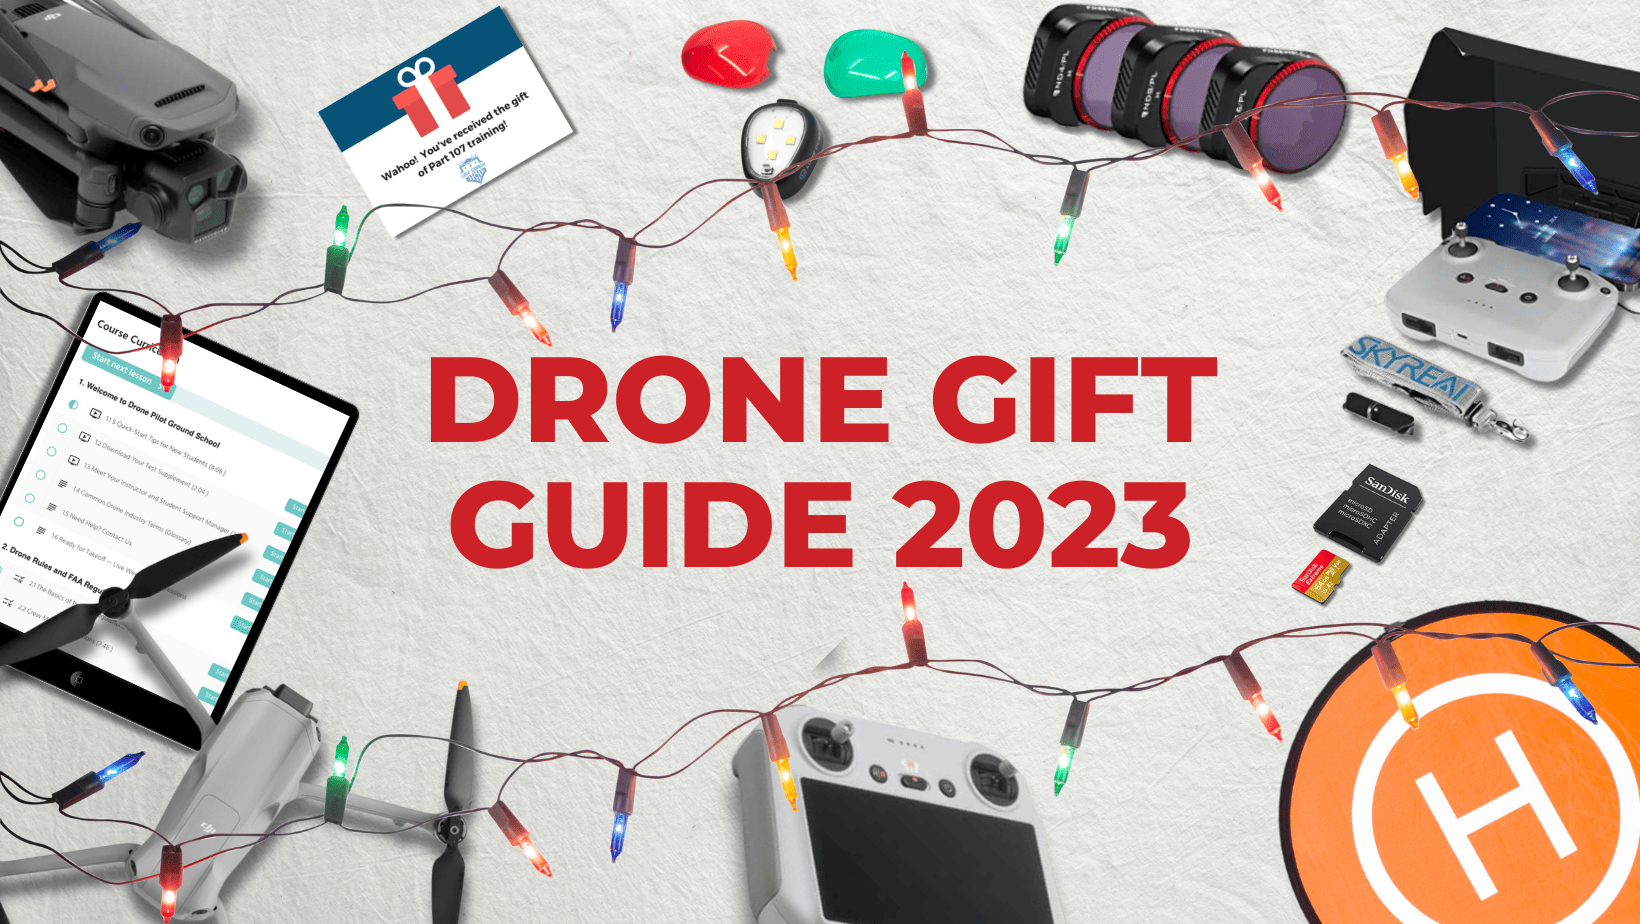 Drone Holiday Gift Guide: Shop Drones and Accessories for Kids and Adults